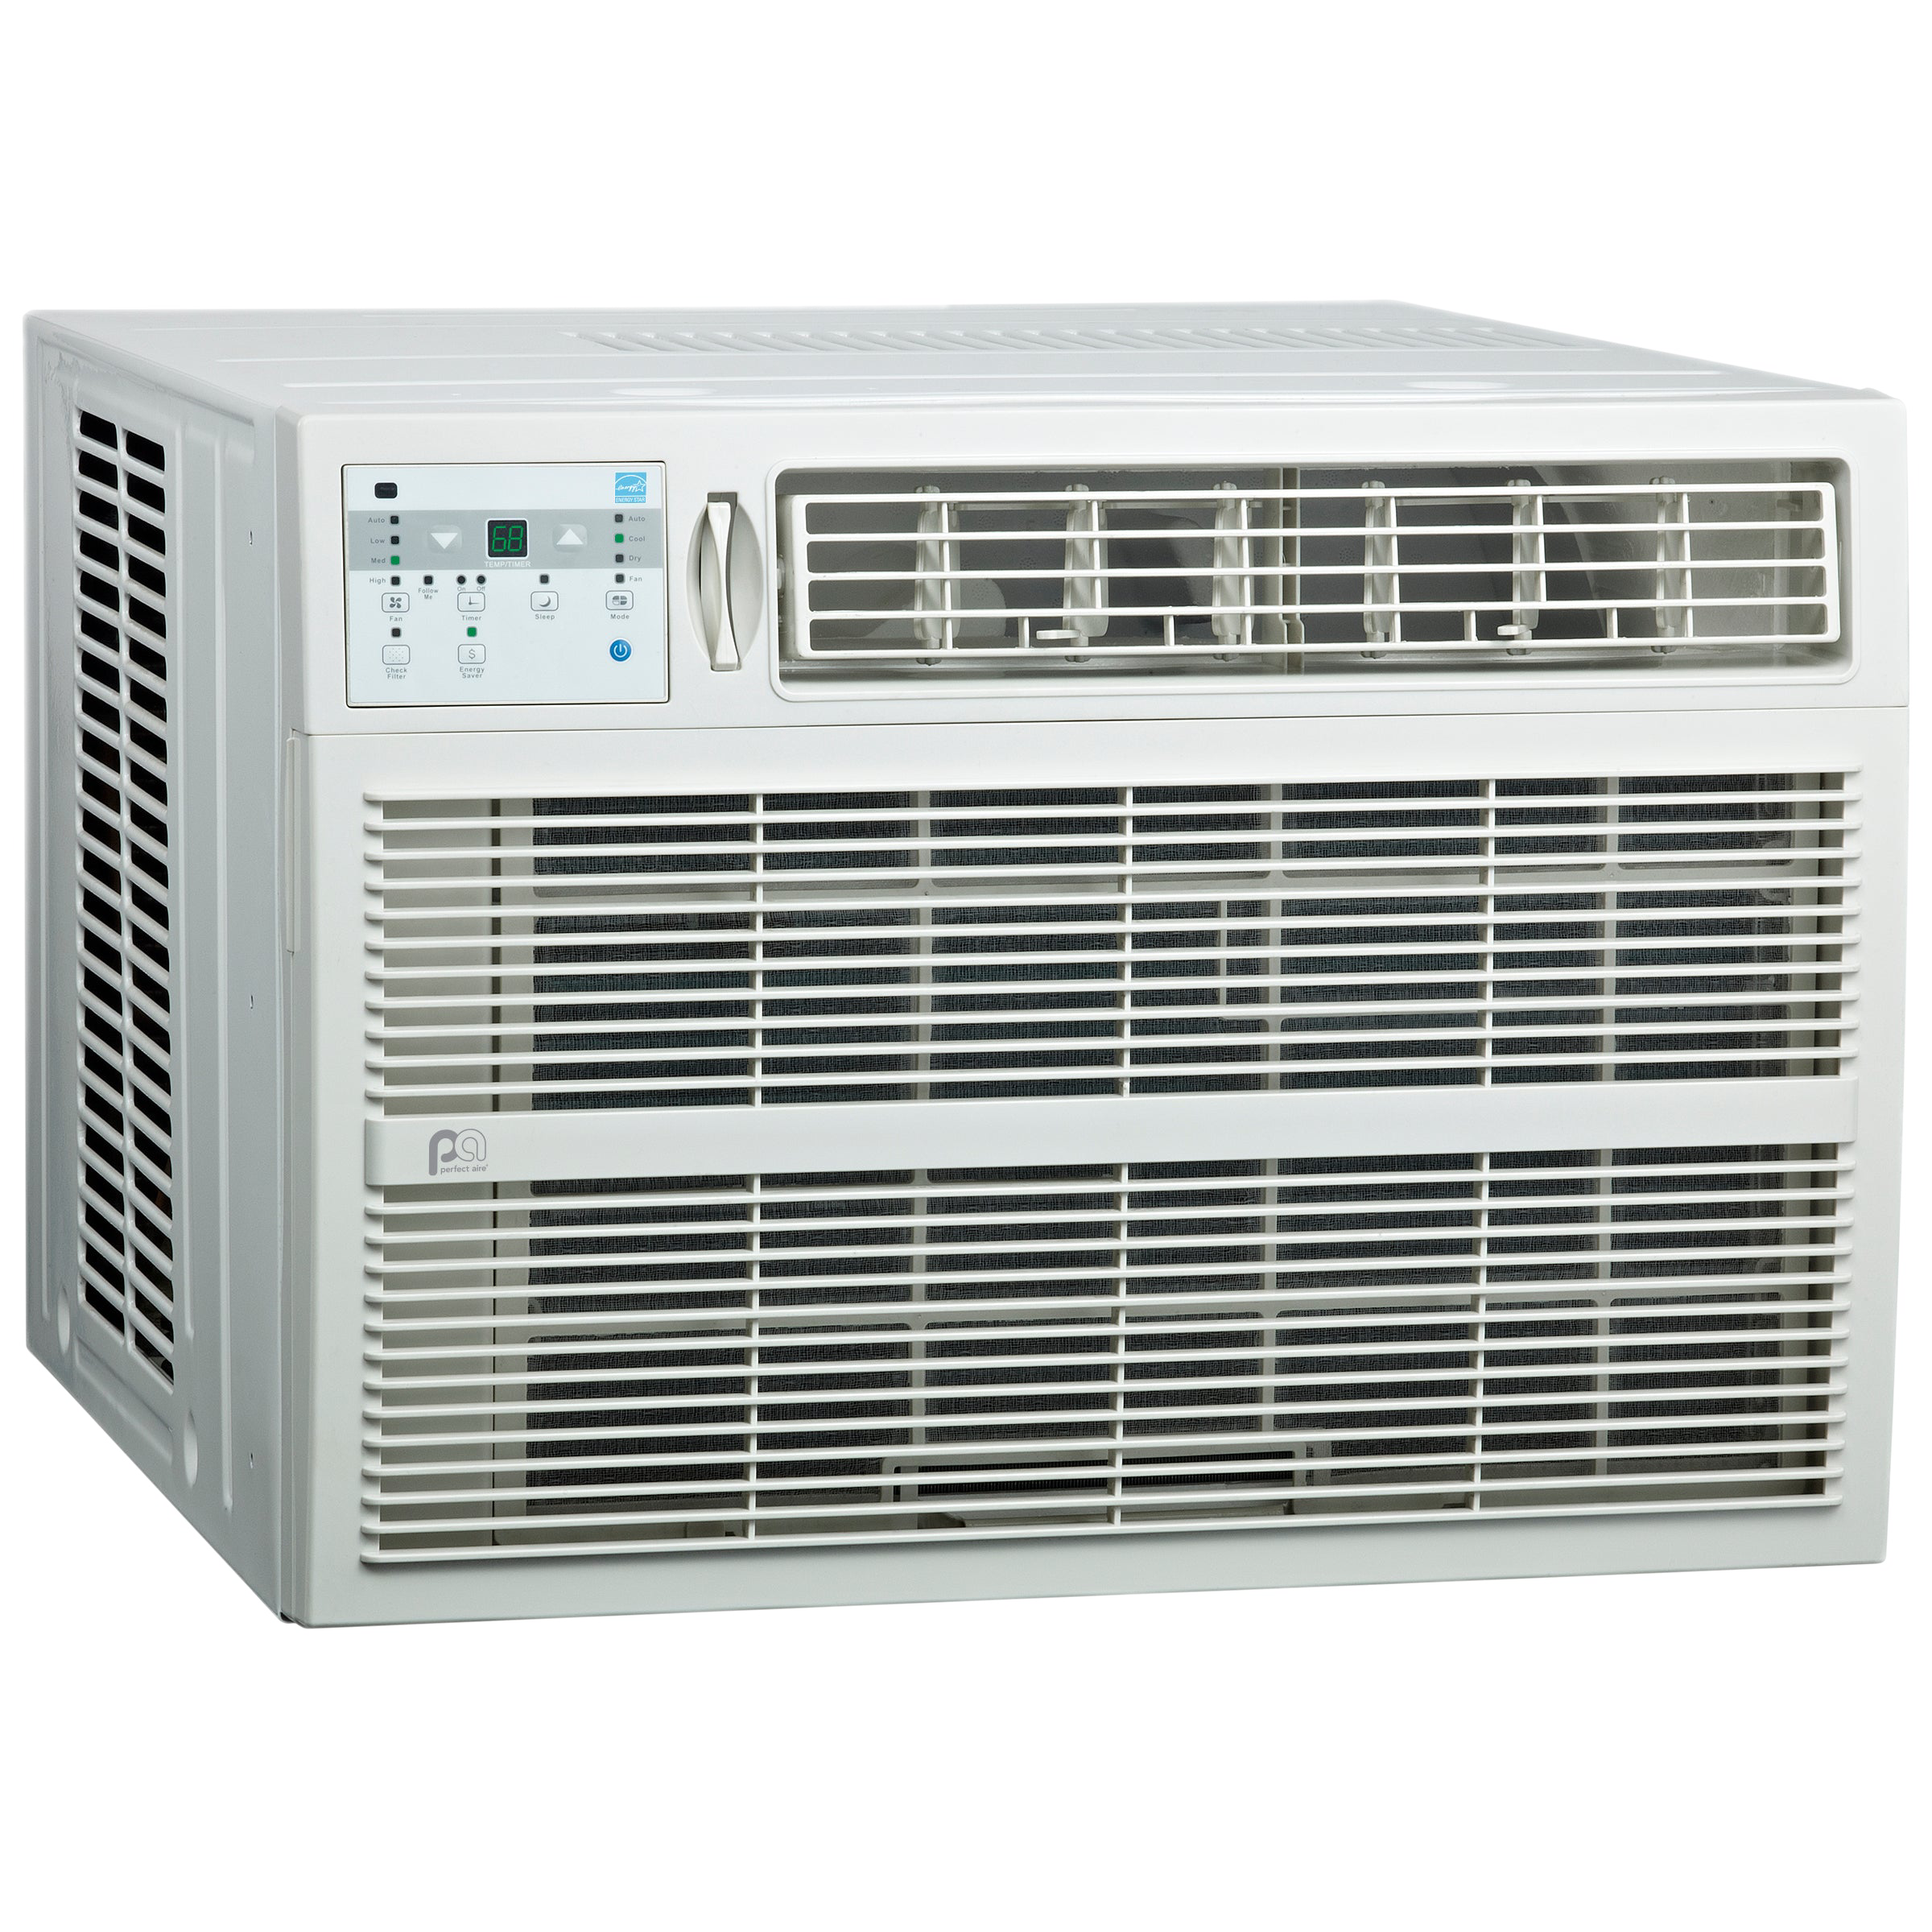 5PAC15000 Perfect Aire 15,000 BTU ENERGY STAR Window Room Air Conditioner, Sq. ft: 550-700 Coverage, With Remote Control